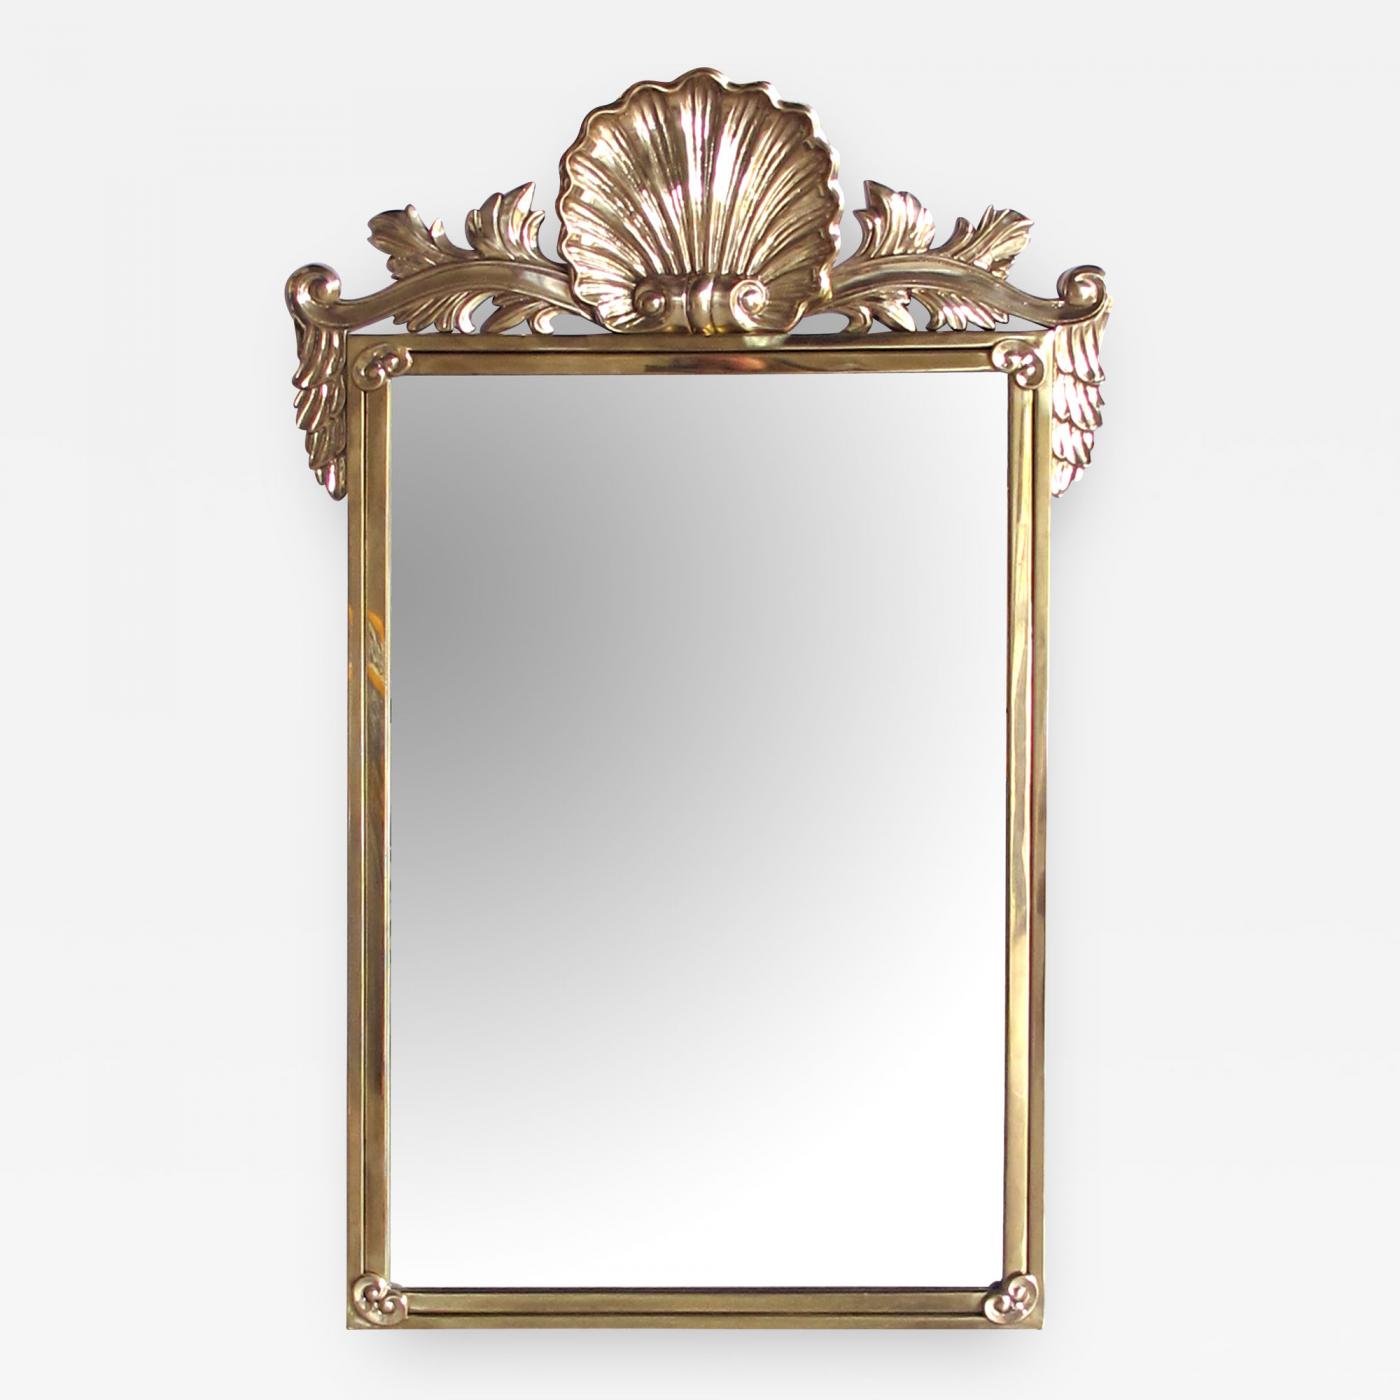 https://cdn.incollect.com/sites/default/files/zoom/-Decorative-Crafts-Inc-A-good-quality-Italian-Hollywood-regency-brass-mirror-by-Decorative-Crafts-260372-718784.jpg